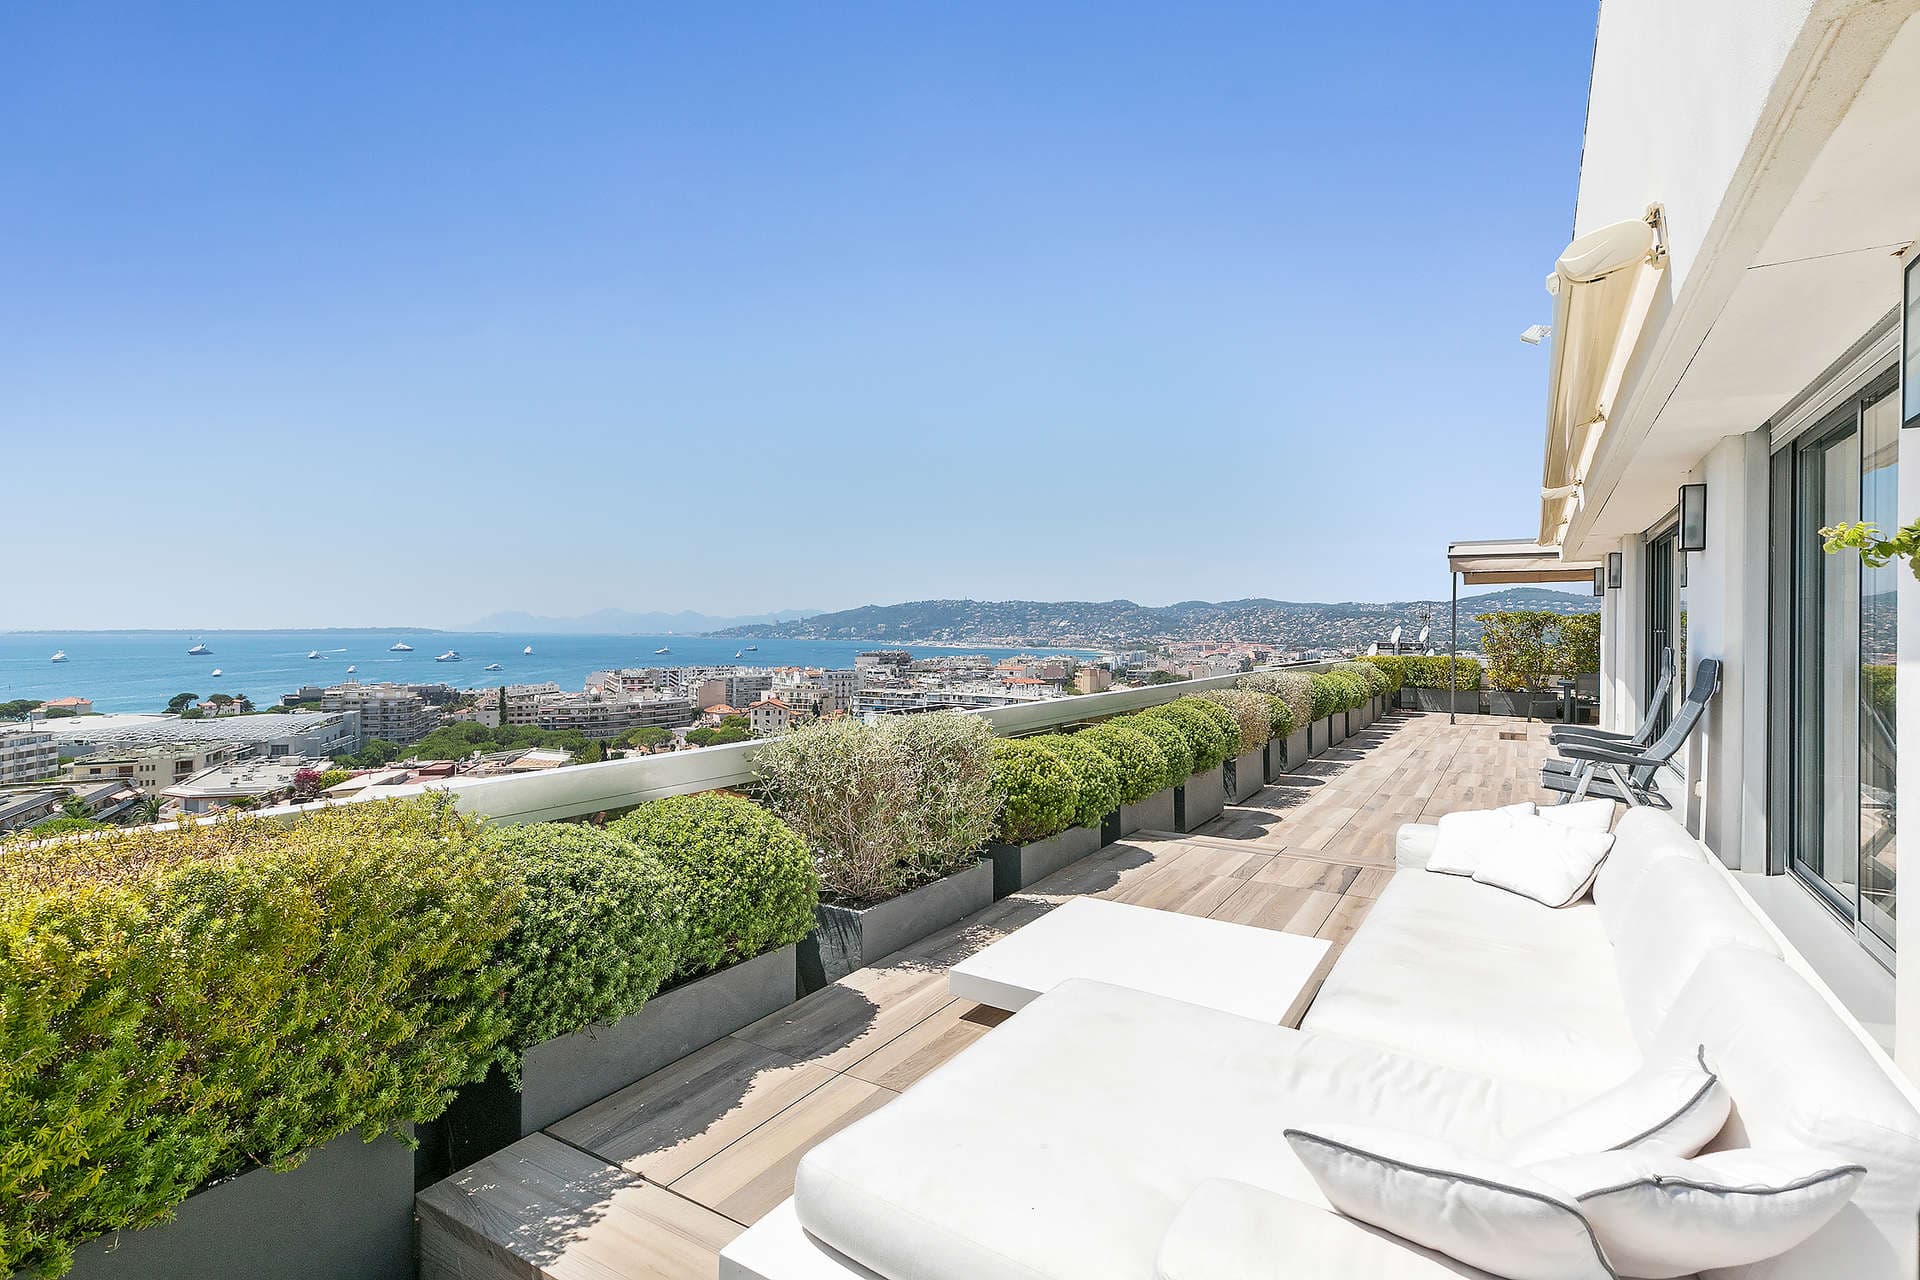 3 Bedroom Penthouse For Sale Antibes Lp01013 1e946701cb4a3a00.jpg